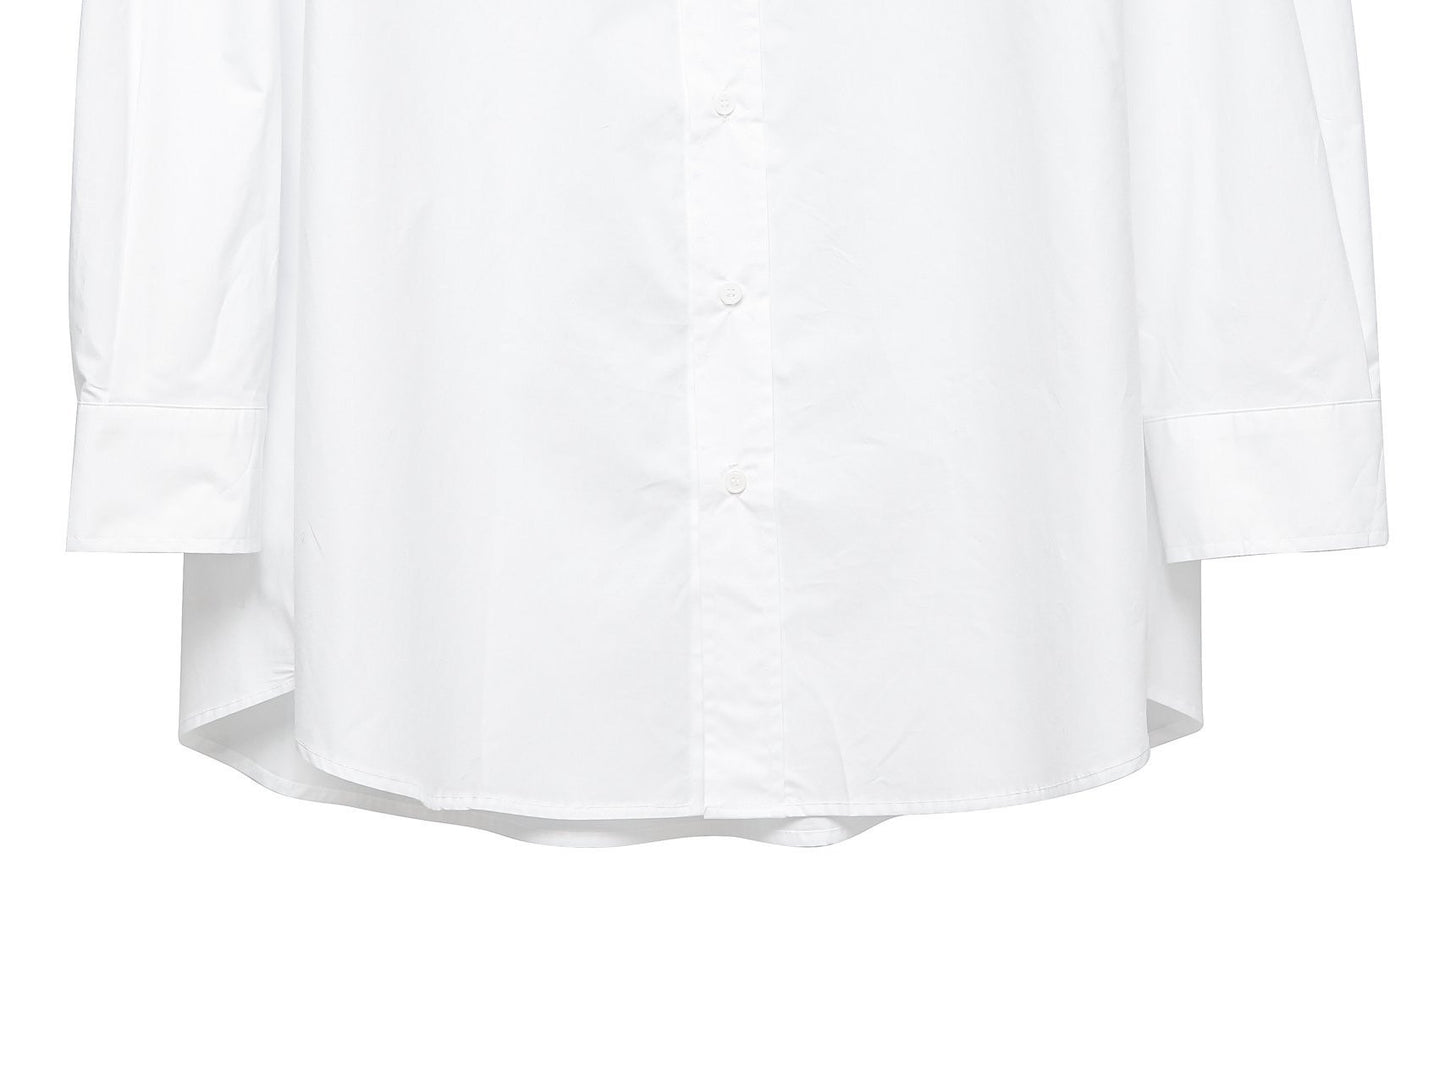 [PAPERMOON] SS / Maxi Oversized Padded Shoulder Cotton Button Down Shirt